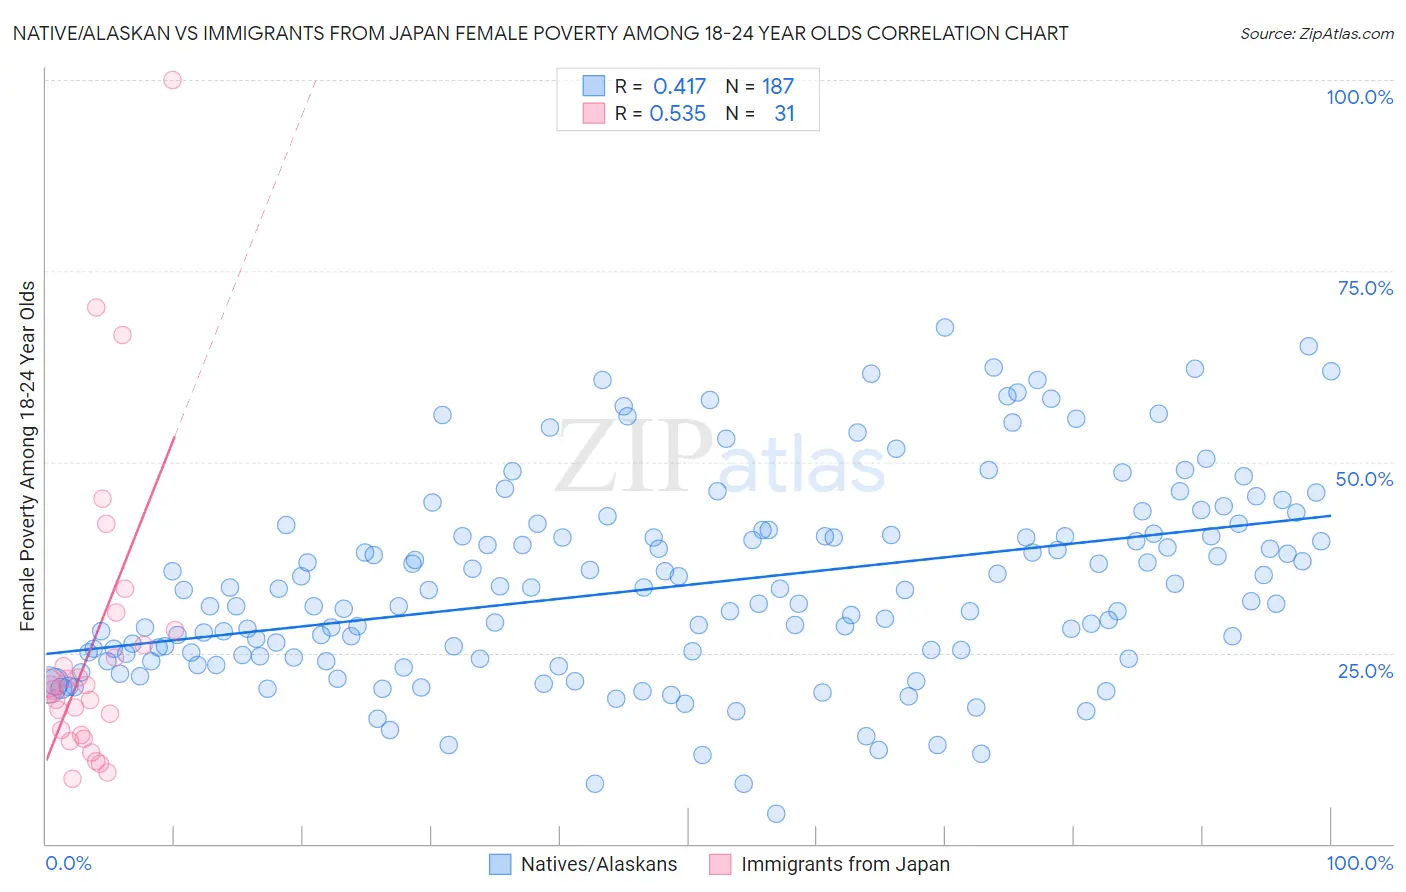 Native/Alaskan vs Immigrants from Japan Female Poverty Among 18-24 Year Olds